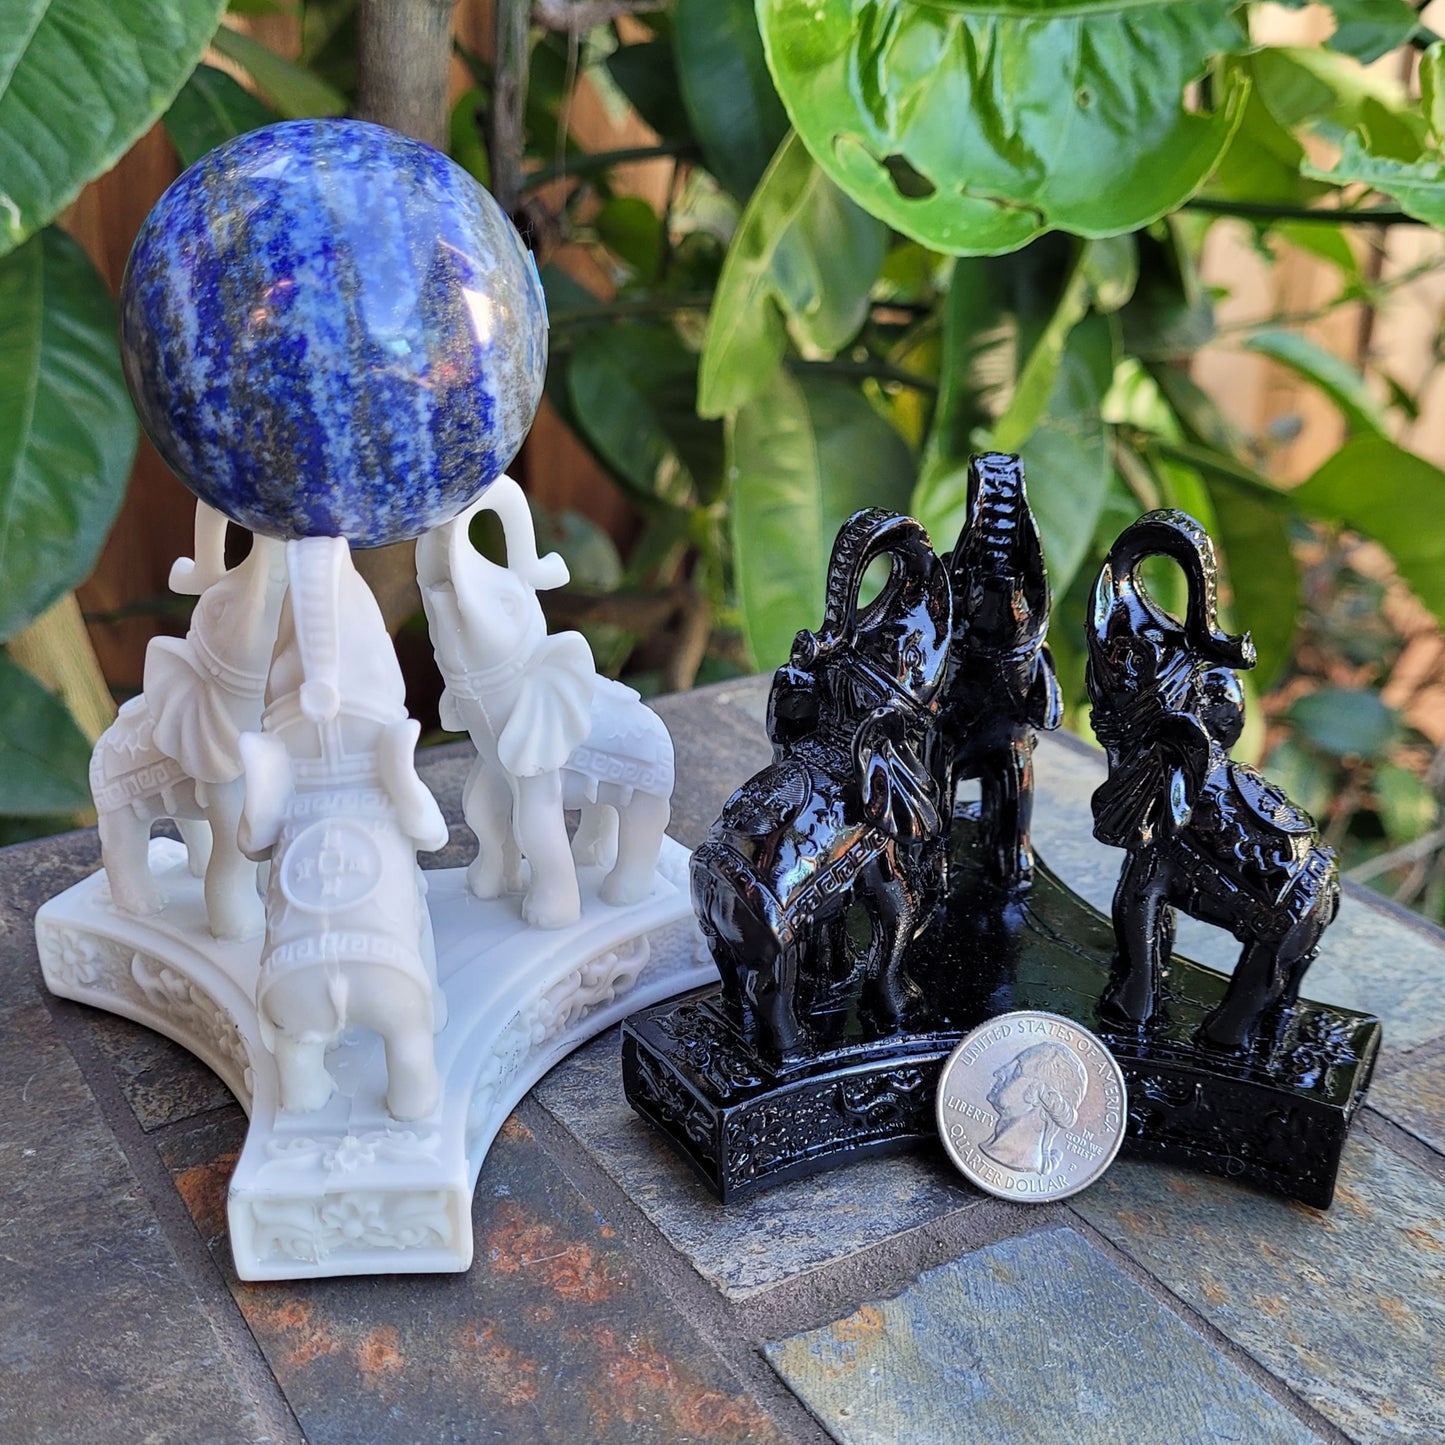 Elephant Sphere Holder Display Stand for Crystal Balls or Eggs 2" to 5" (51mm to 126mm)